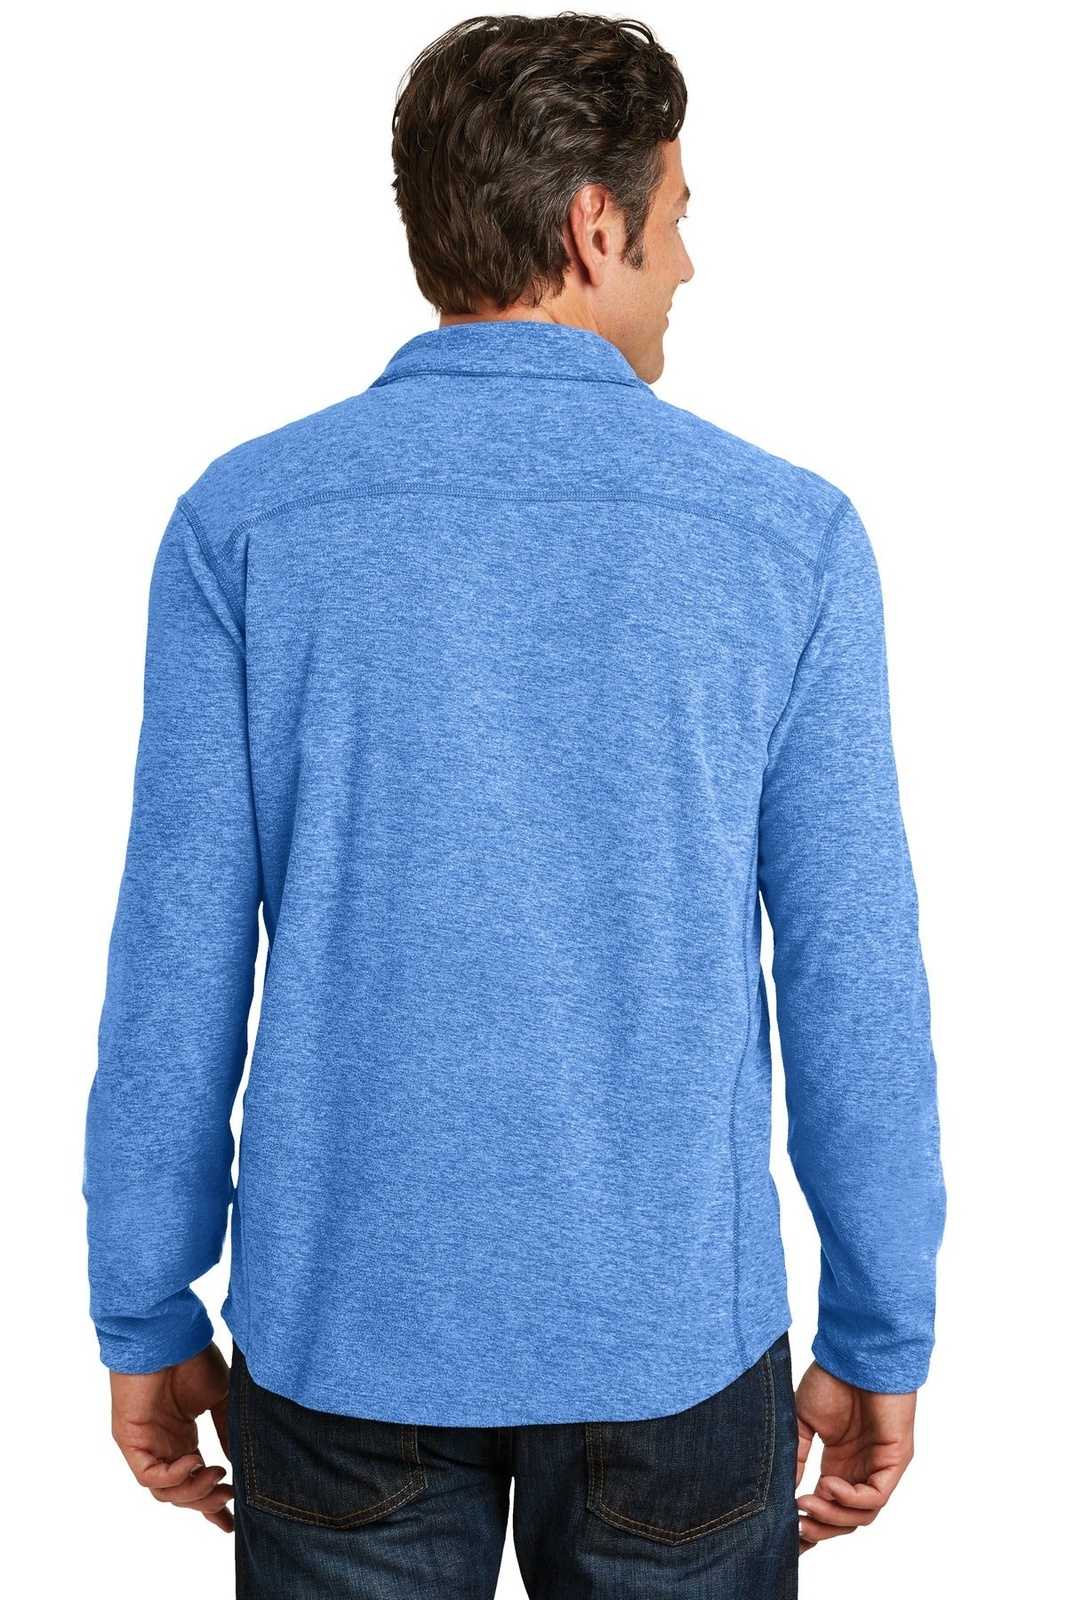 Port Authority F234 Heather Microfleece 1/2-Zip Pullover - Light Royal Heather - HIT a Double - 1